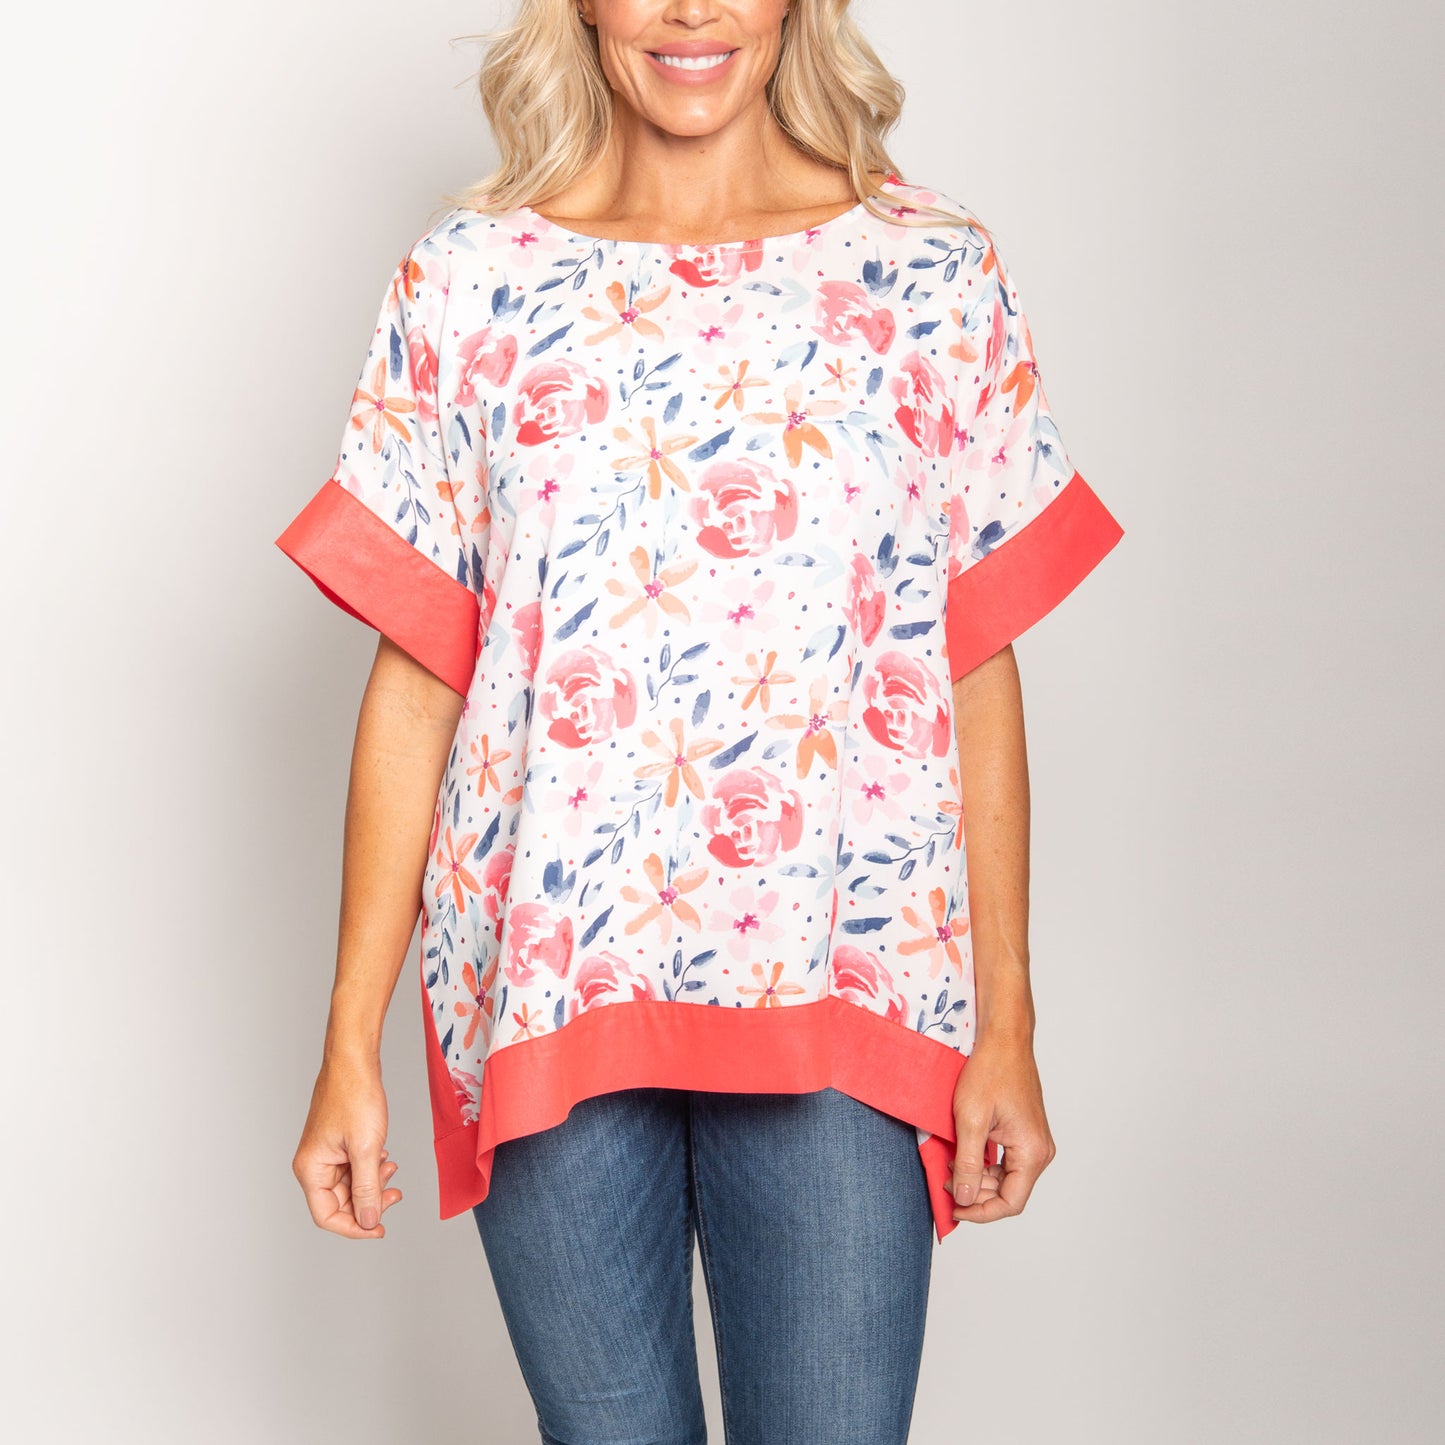 Rae One Size Sheer Short Sleeve Boat Neck Poncho Top